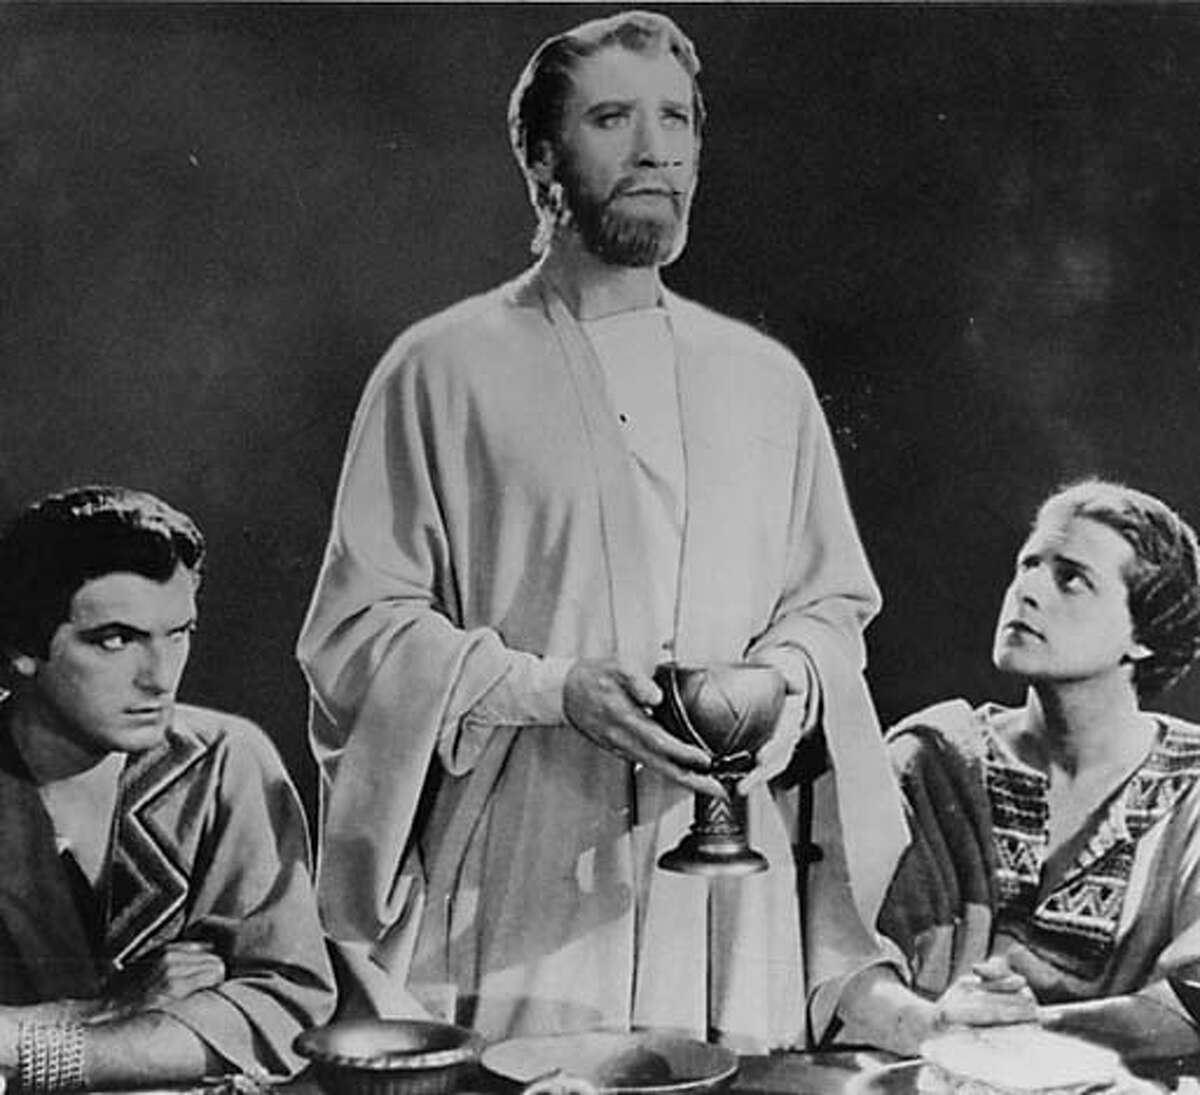 Starring H.B. Warner, in this story of the crucifixion and the resurrection. This 1927 Cecil B. Demille Classic was considred controversial at the time because Demille used an actor, Warner, to portray Christ, something which had never been done before. A very special movie for this special Easter Sunday.